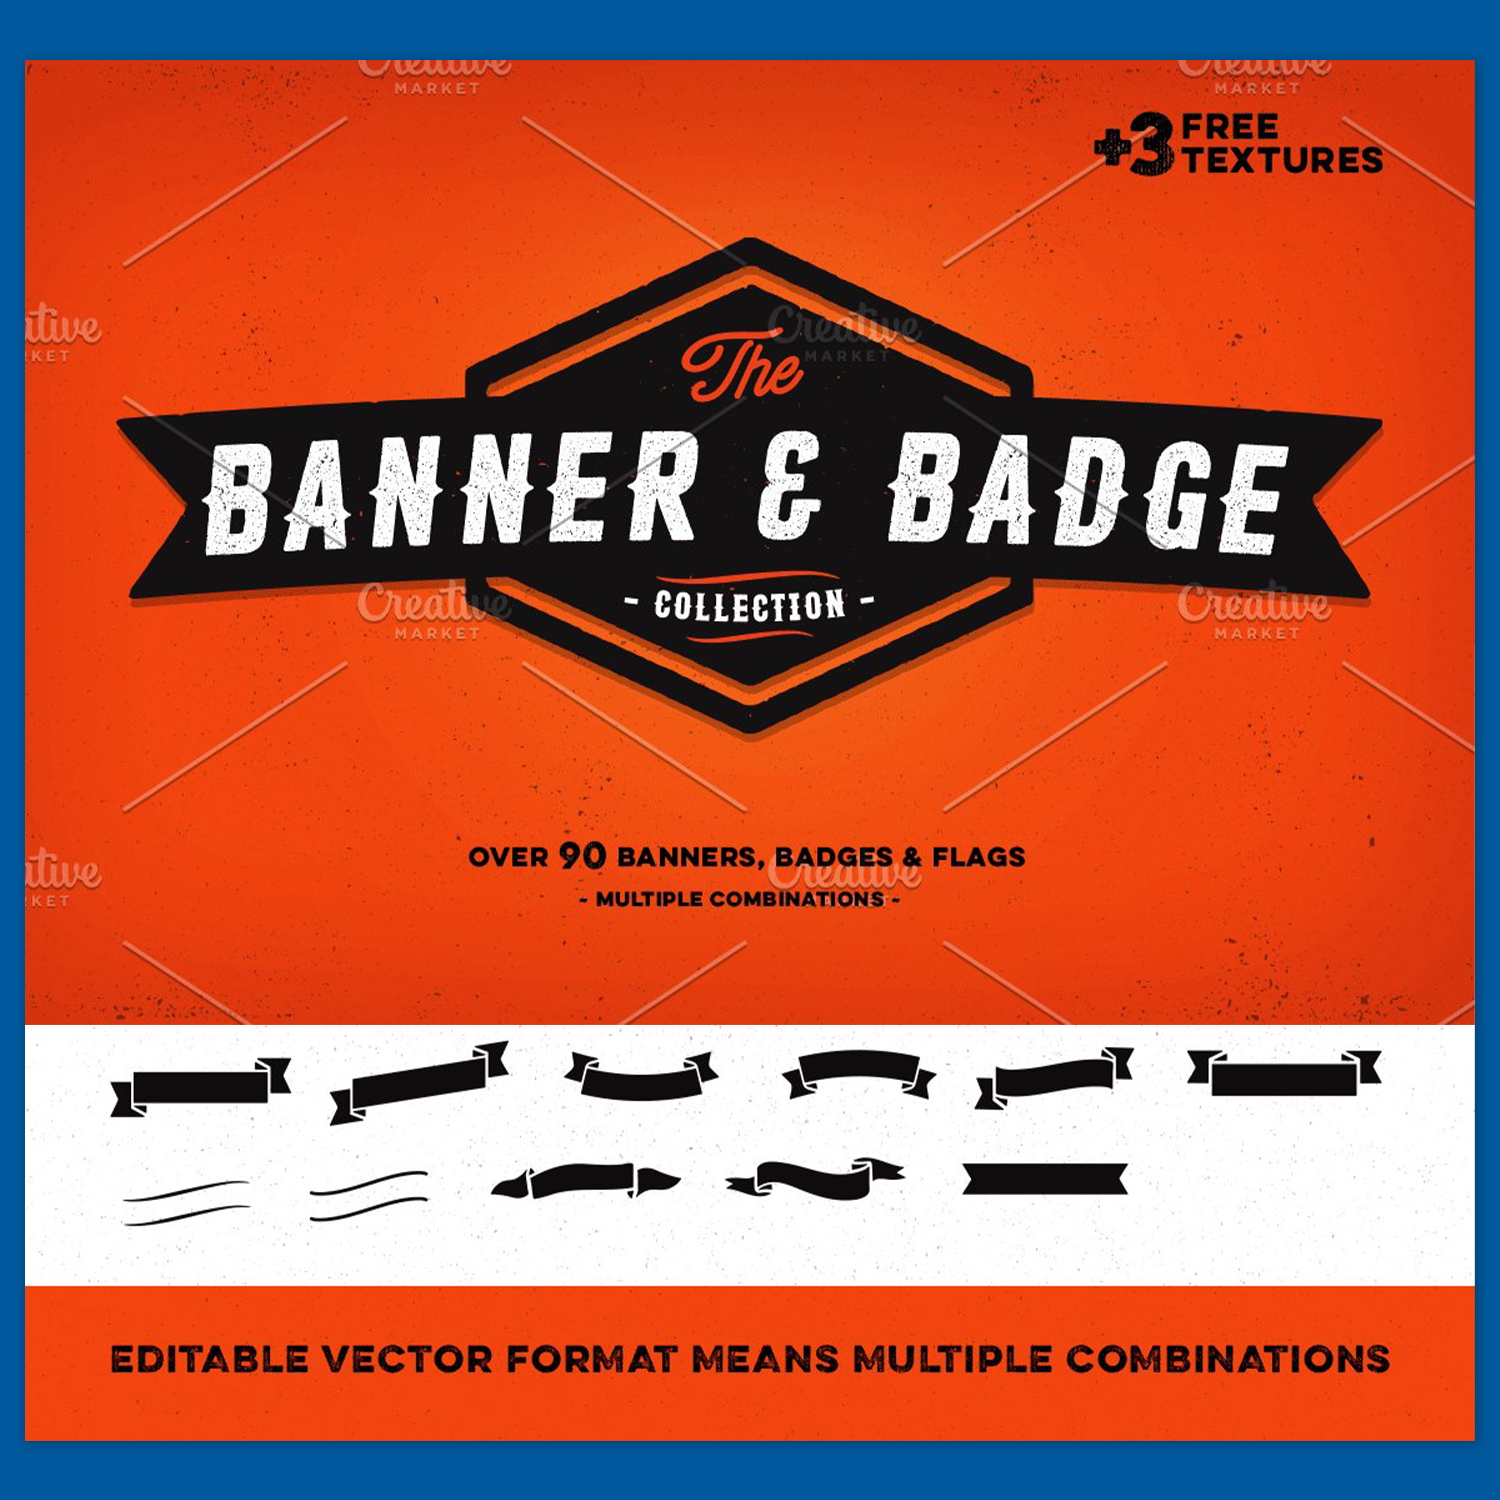 Banner Badge Collection cover image.